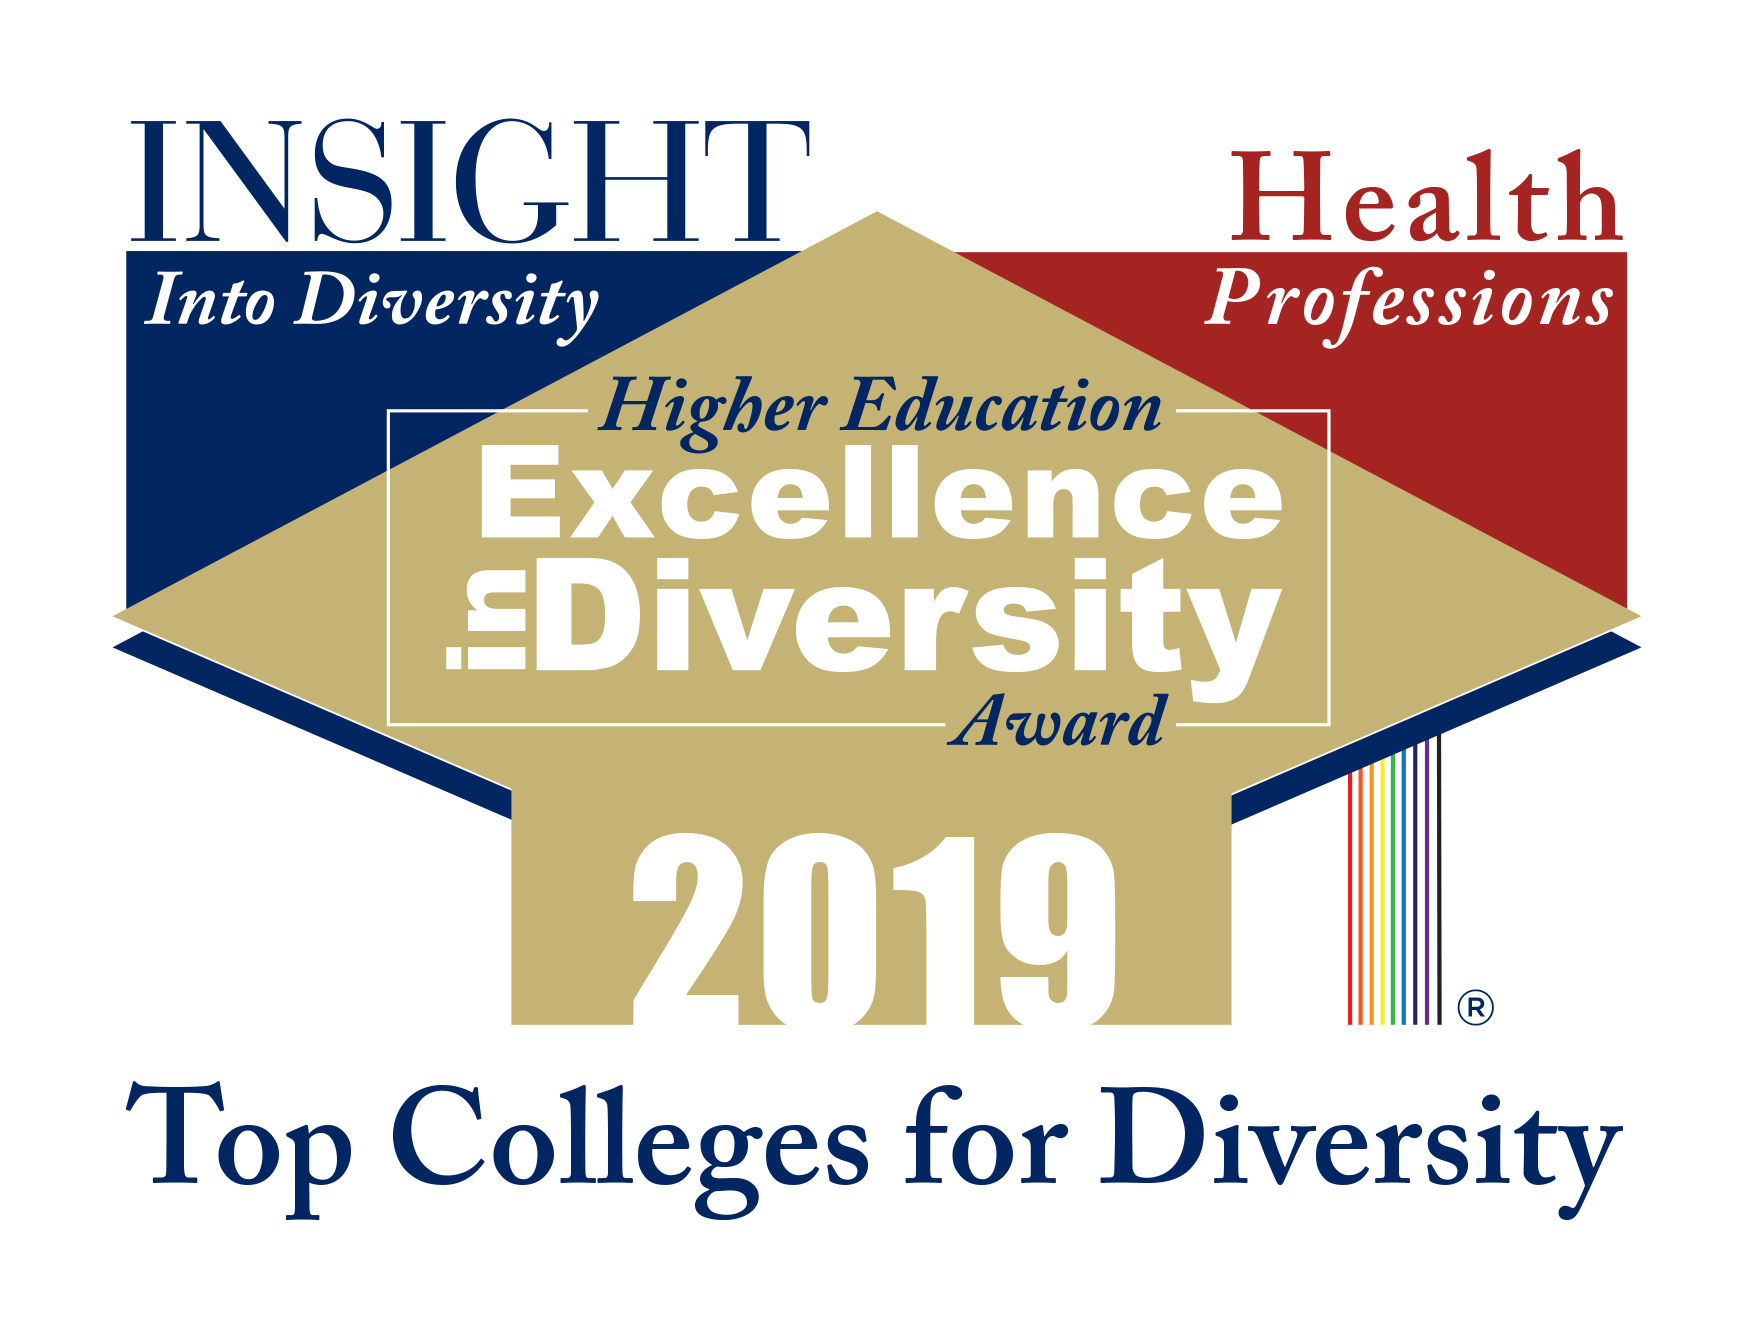 INSIGHT Into Diversity Health Professions Higher Education Excellence -Diversity Award 2019